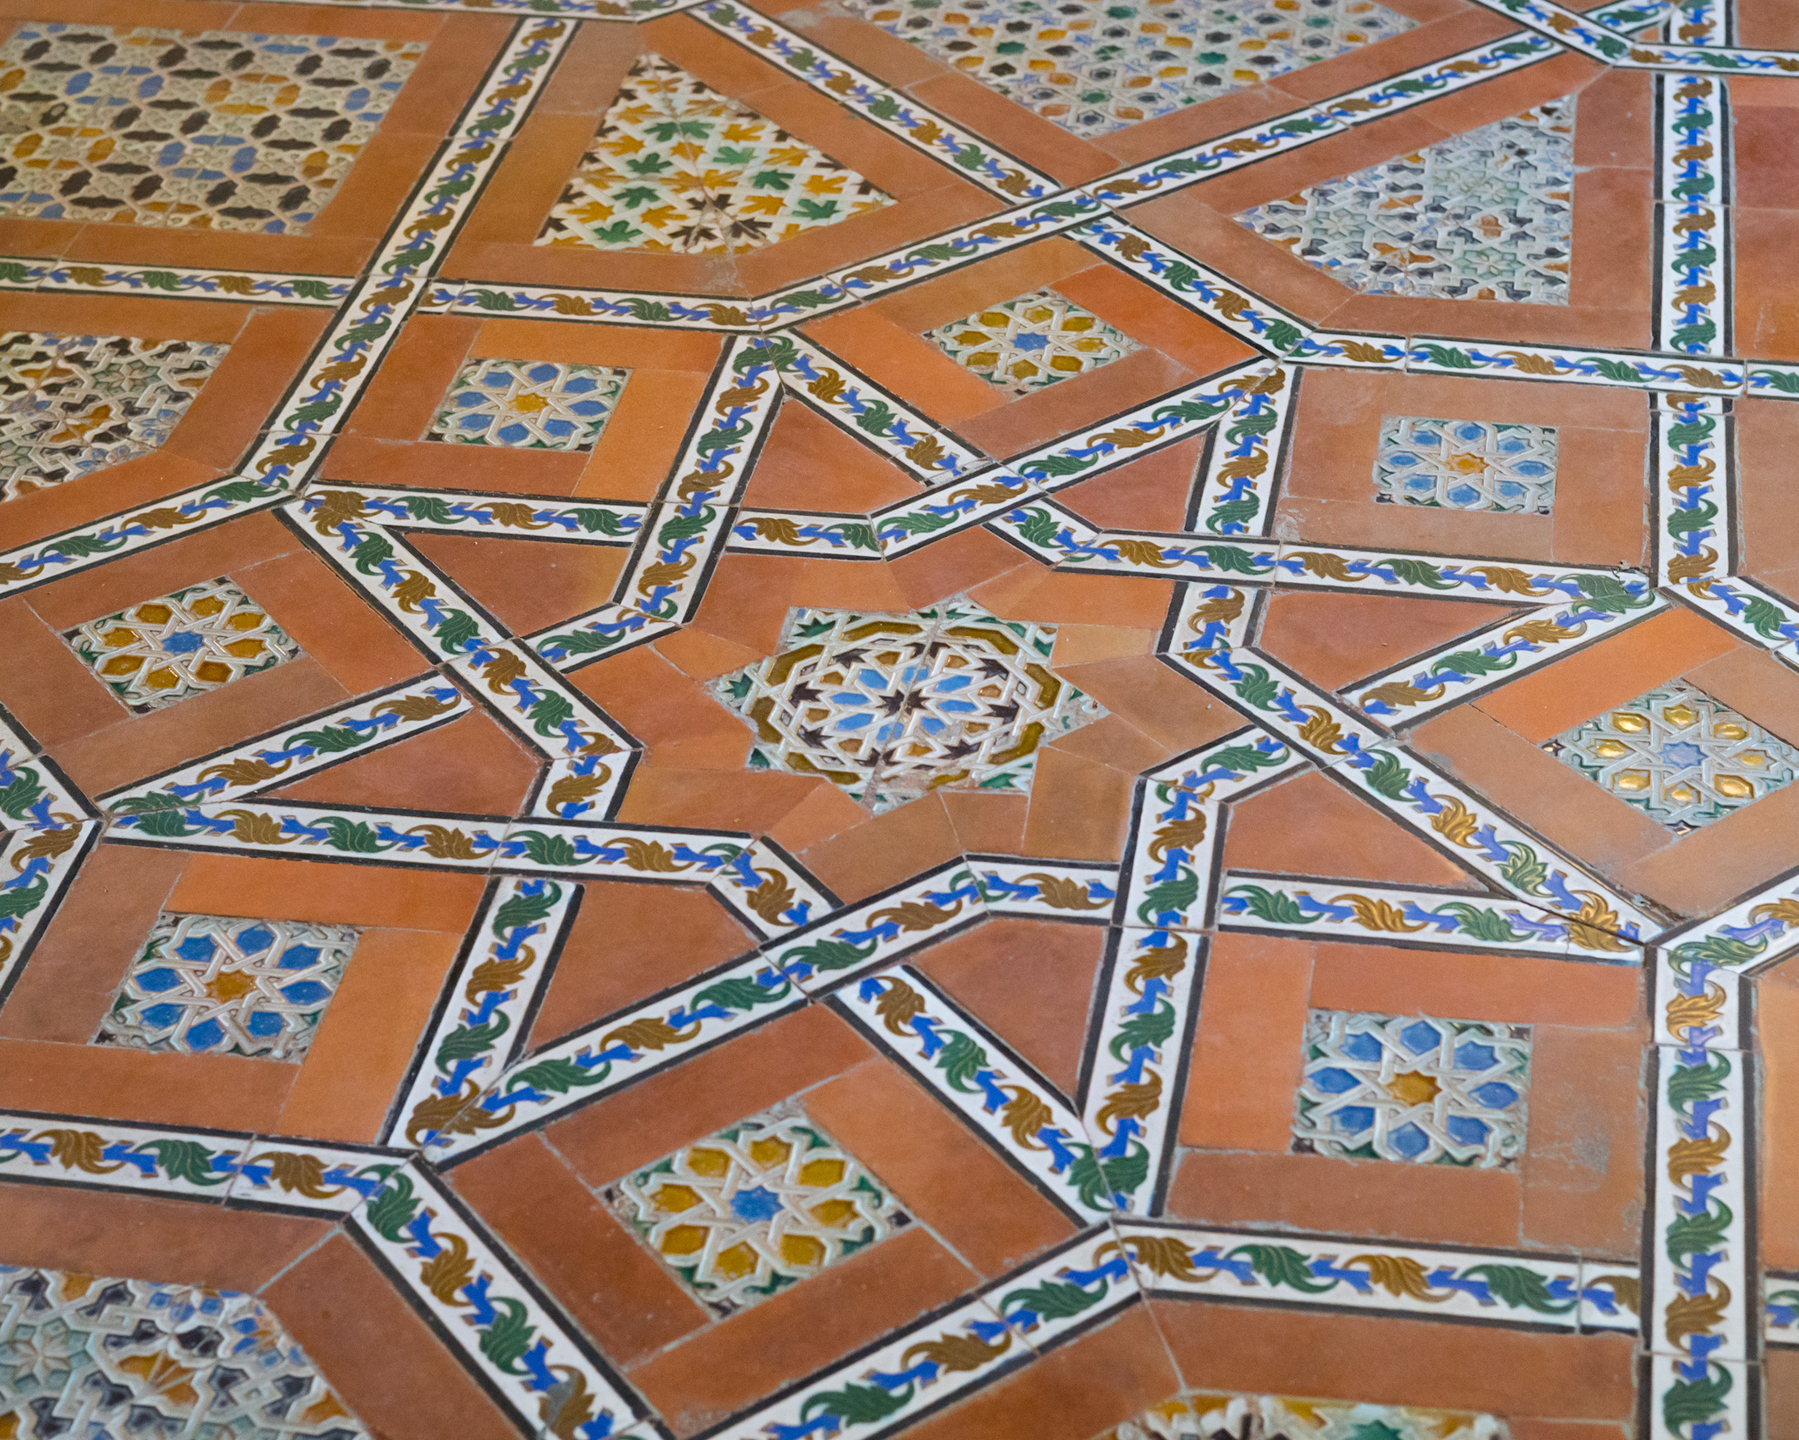 An ornate floor of bright patterns inside geometric shapes.